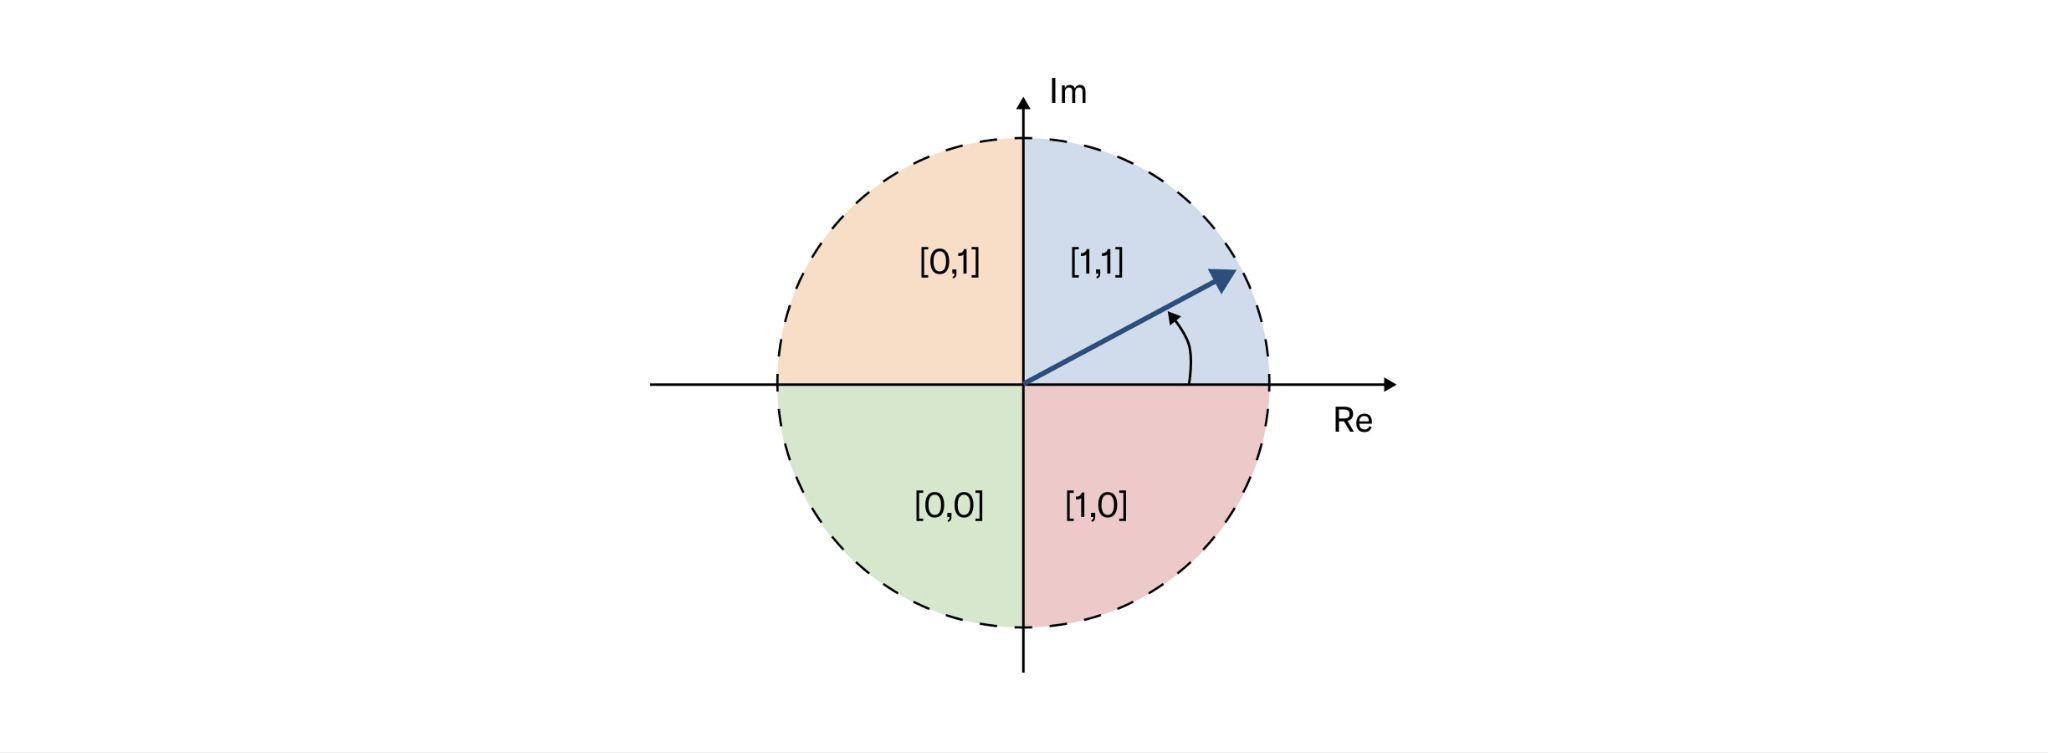 Figure 20: Demodulating the phase information of filter response into four quadrants of the complex space. The resulting cyclic codes are used to produce the final iris code.